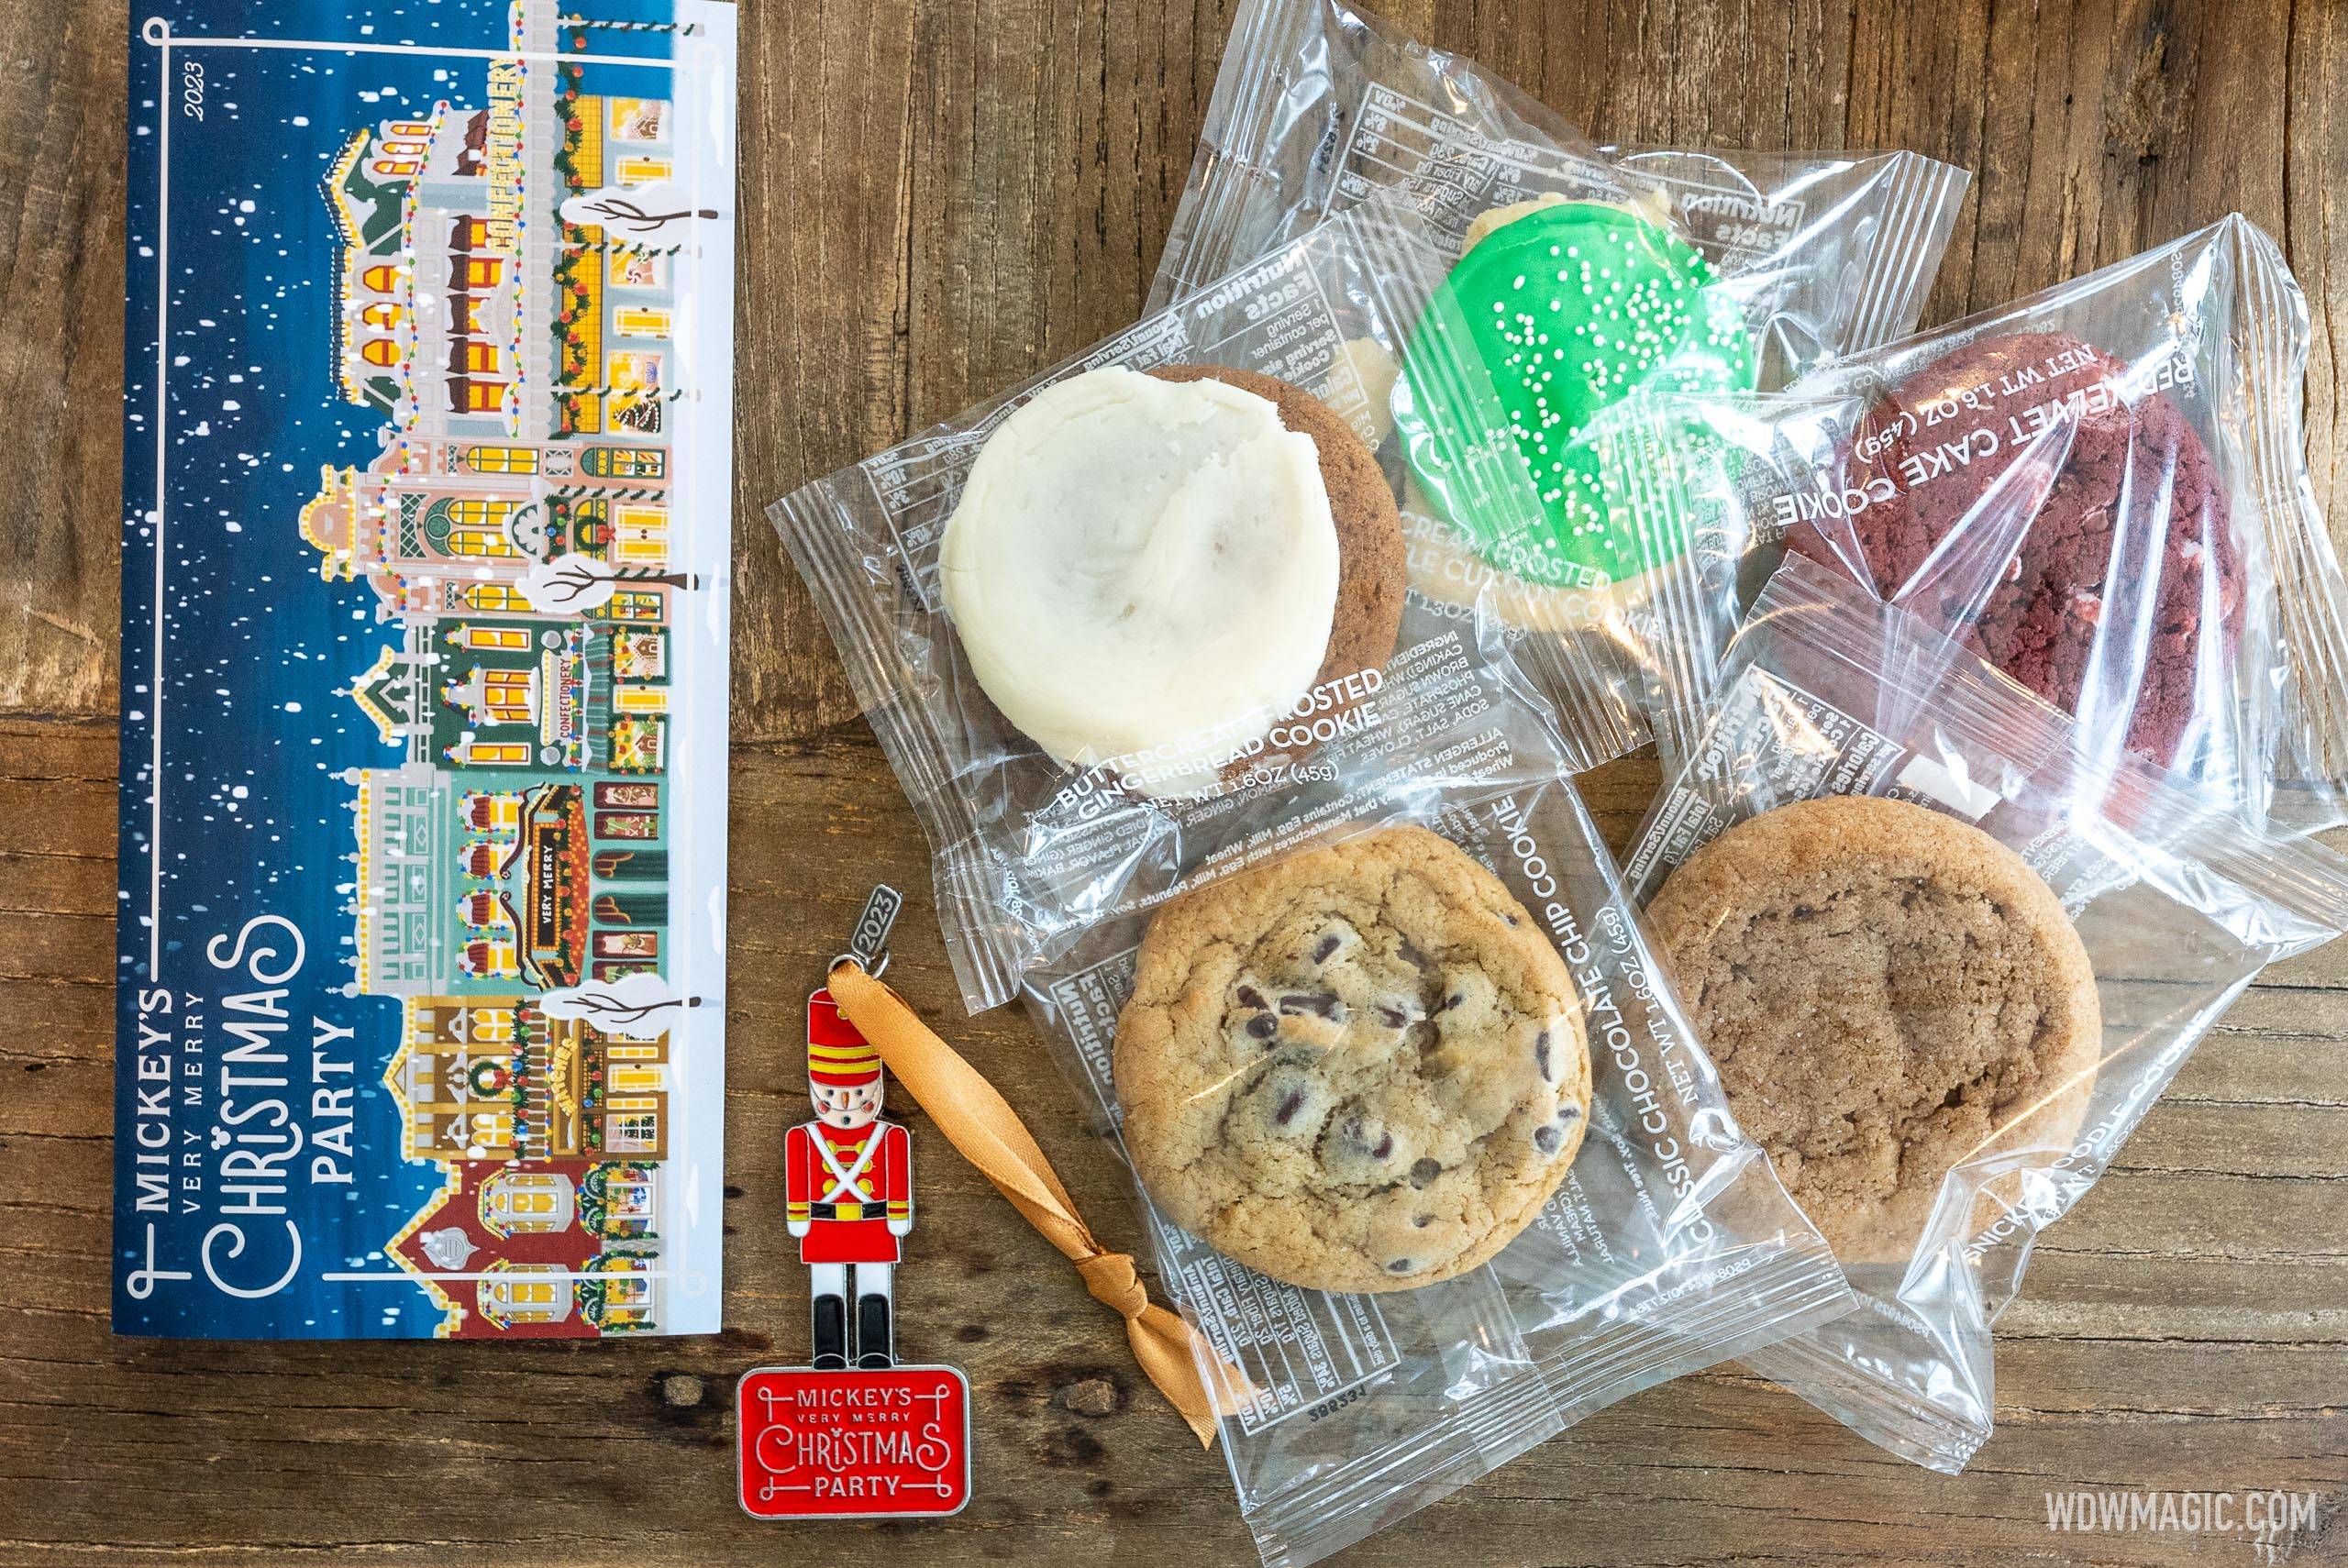 Mickey's Very Merry Christmas Party cookies, ornament, and guide map